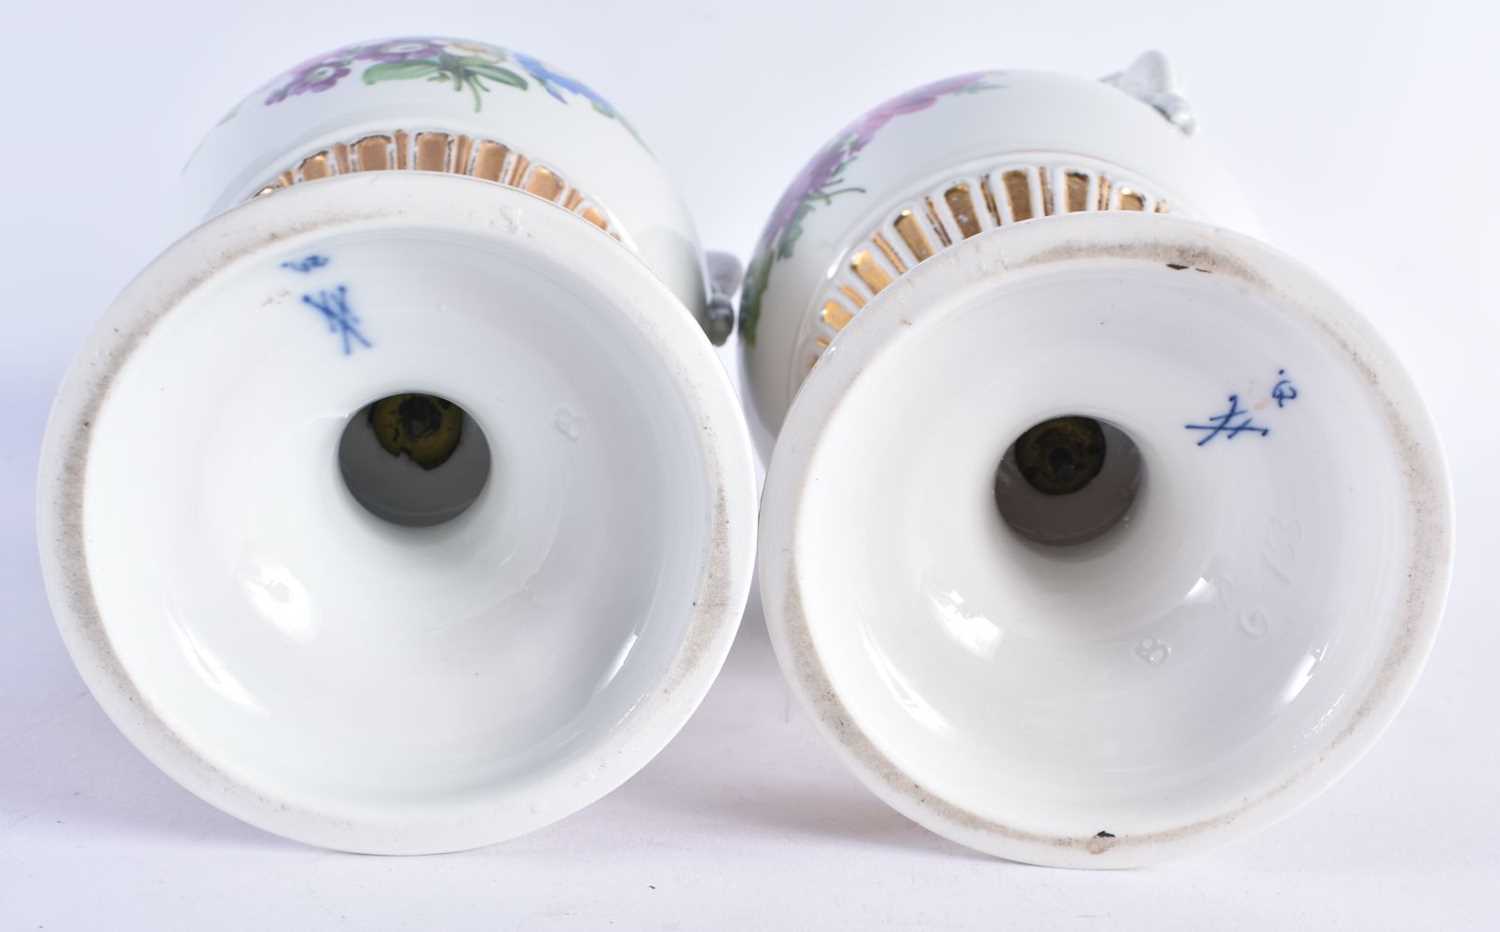 A LARGE PAIR OF EARLY 20TH CENTURY GERMAN TWIN HANDLED MEISSEN PORCELAIN VASES painted with floral - Image 5 of 9